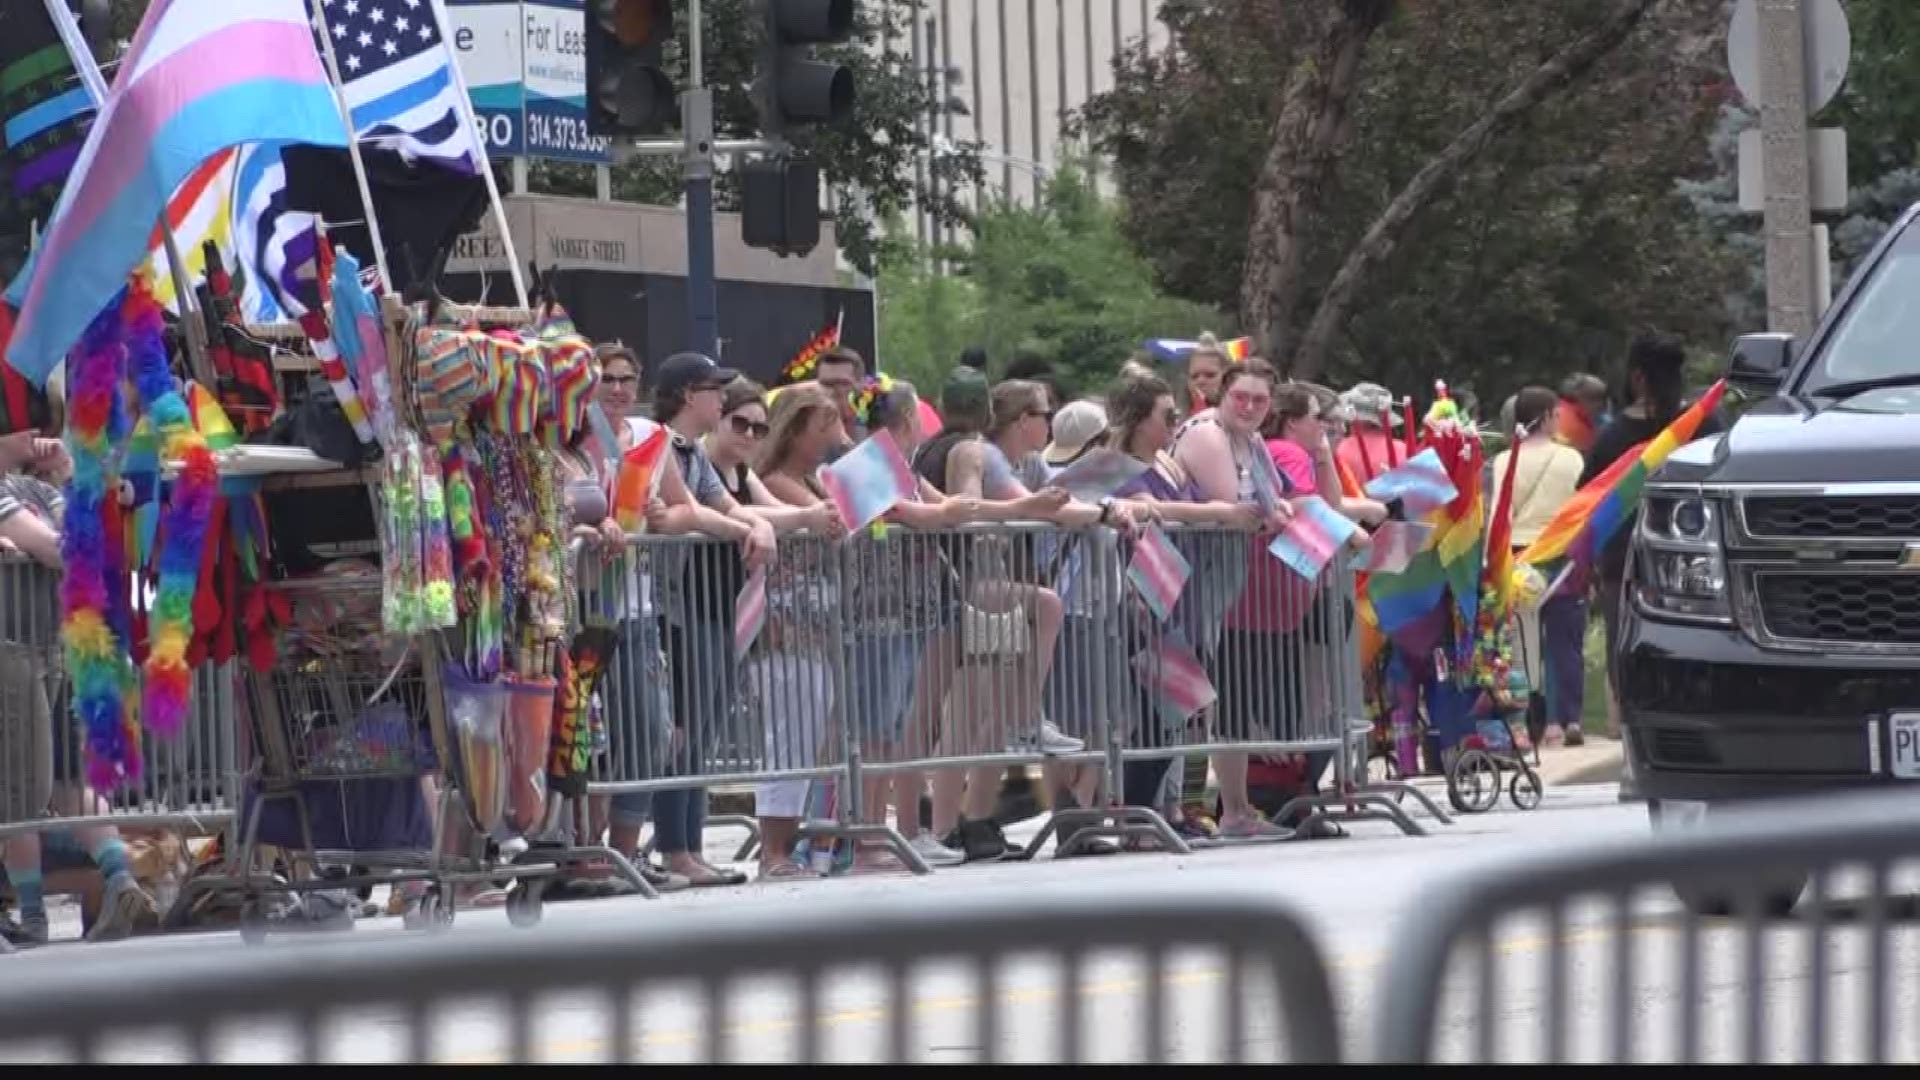 Thousands gather in St. Louis to support gay pride